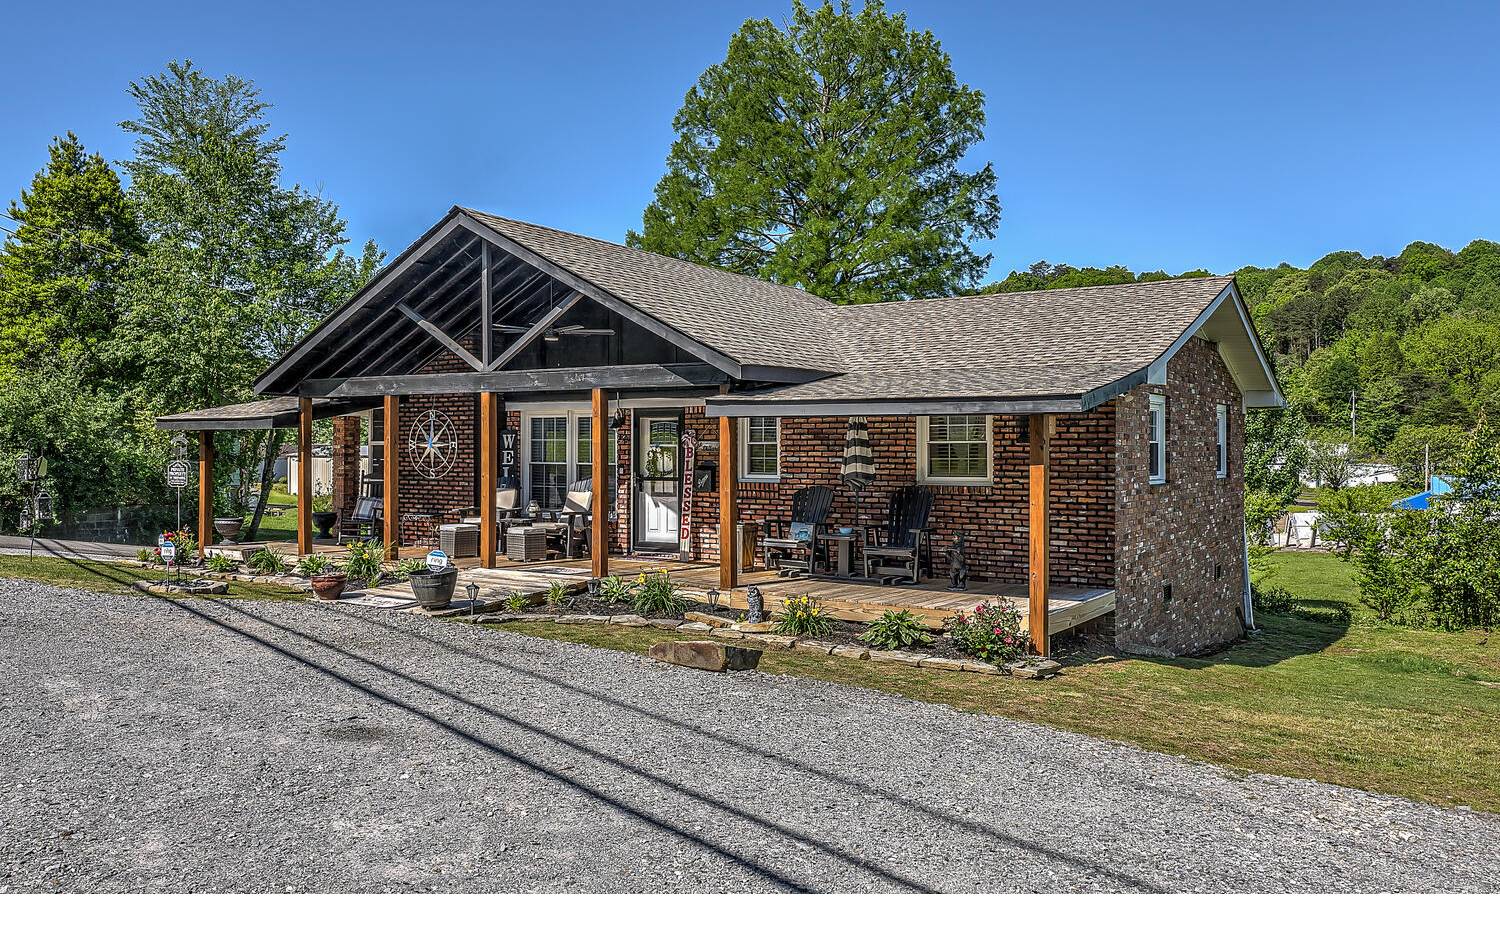 This home has been completely remodeled and what a gem, so close to downtown Ellijay you can bike or walk to the shops and restaurants. This home is zoned C2. The home is just too cute!